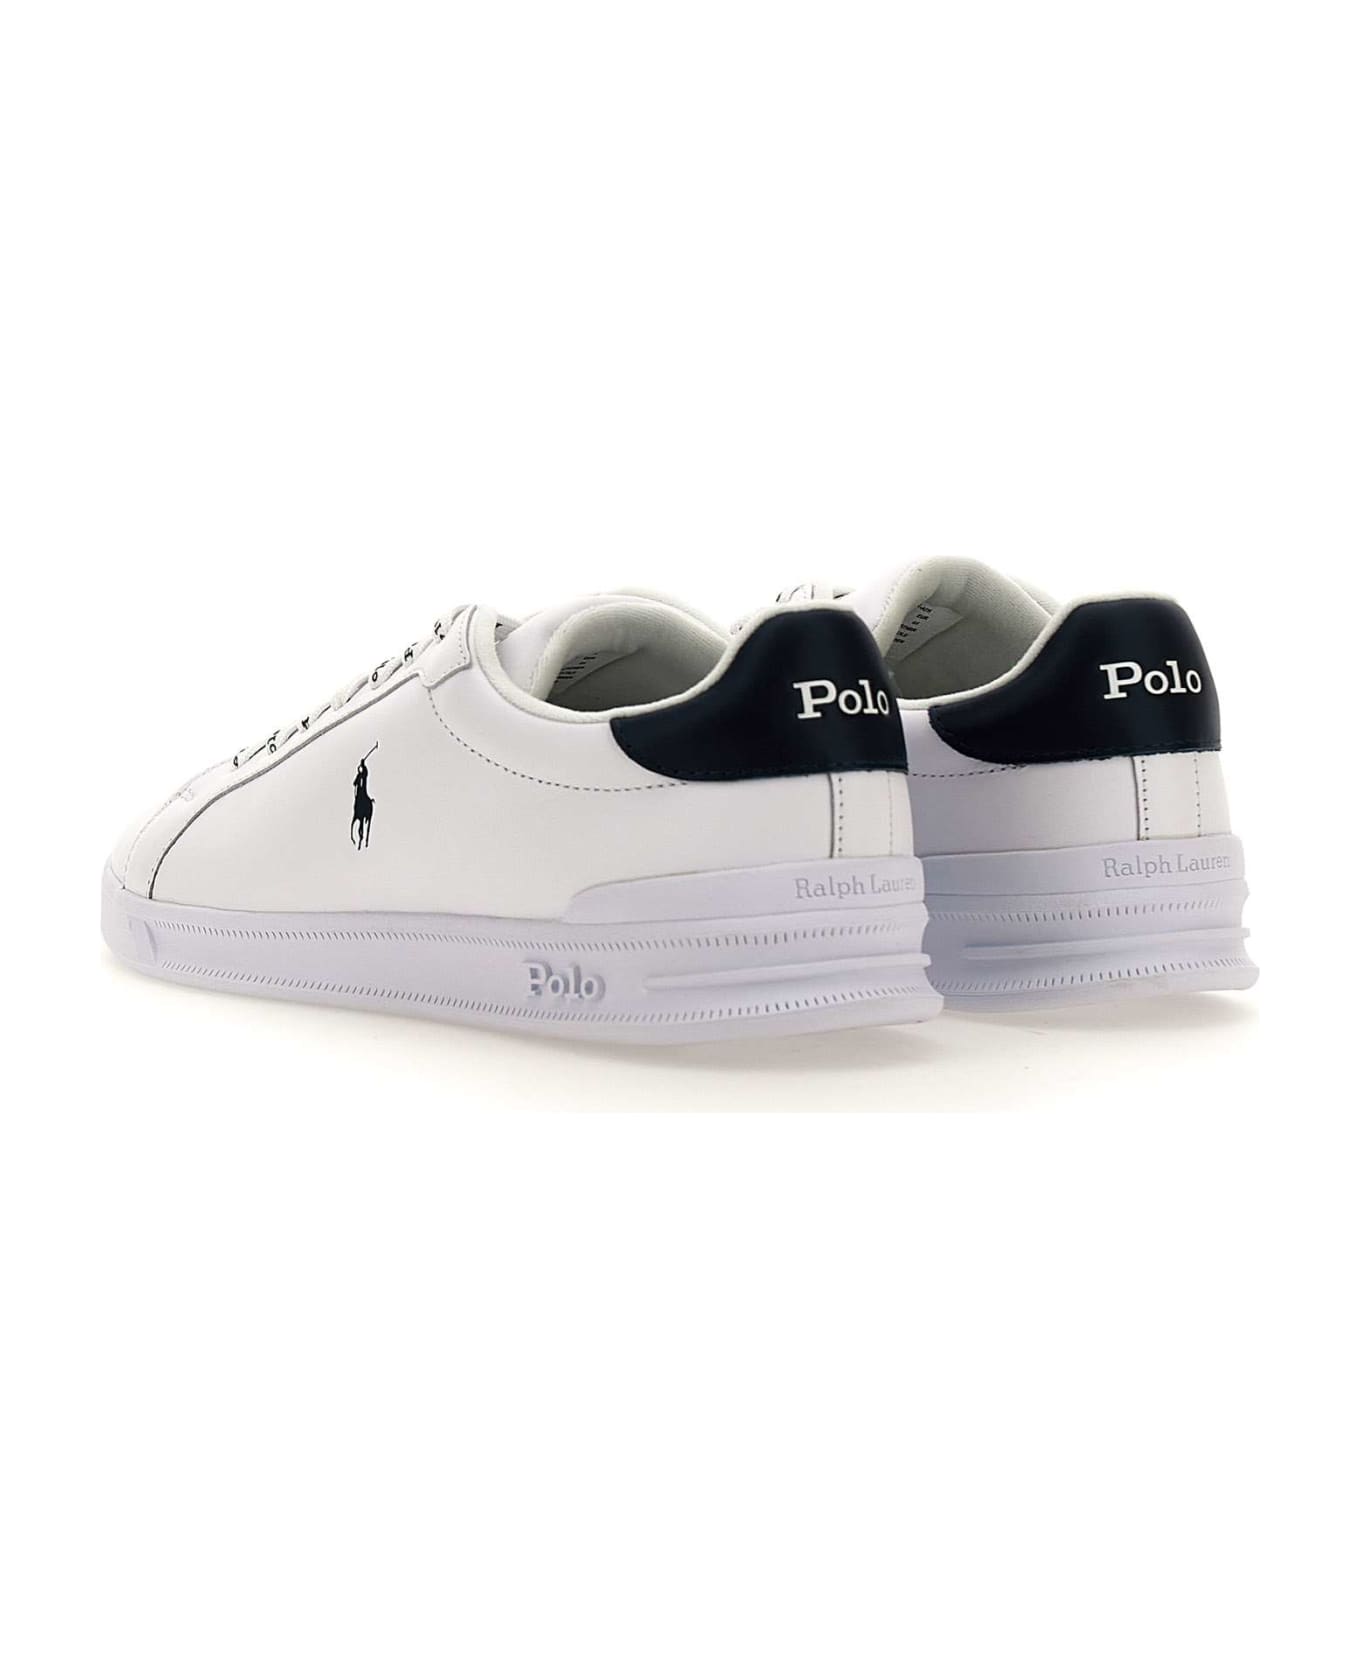 Polo Ralph Lauren "heritage Court Ii" Leather Sneakers - WHITE